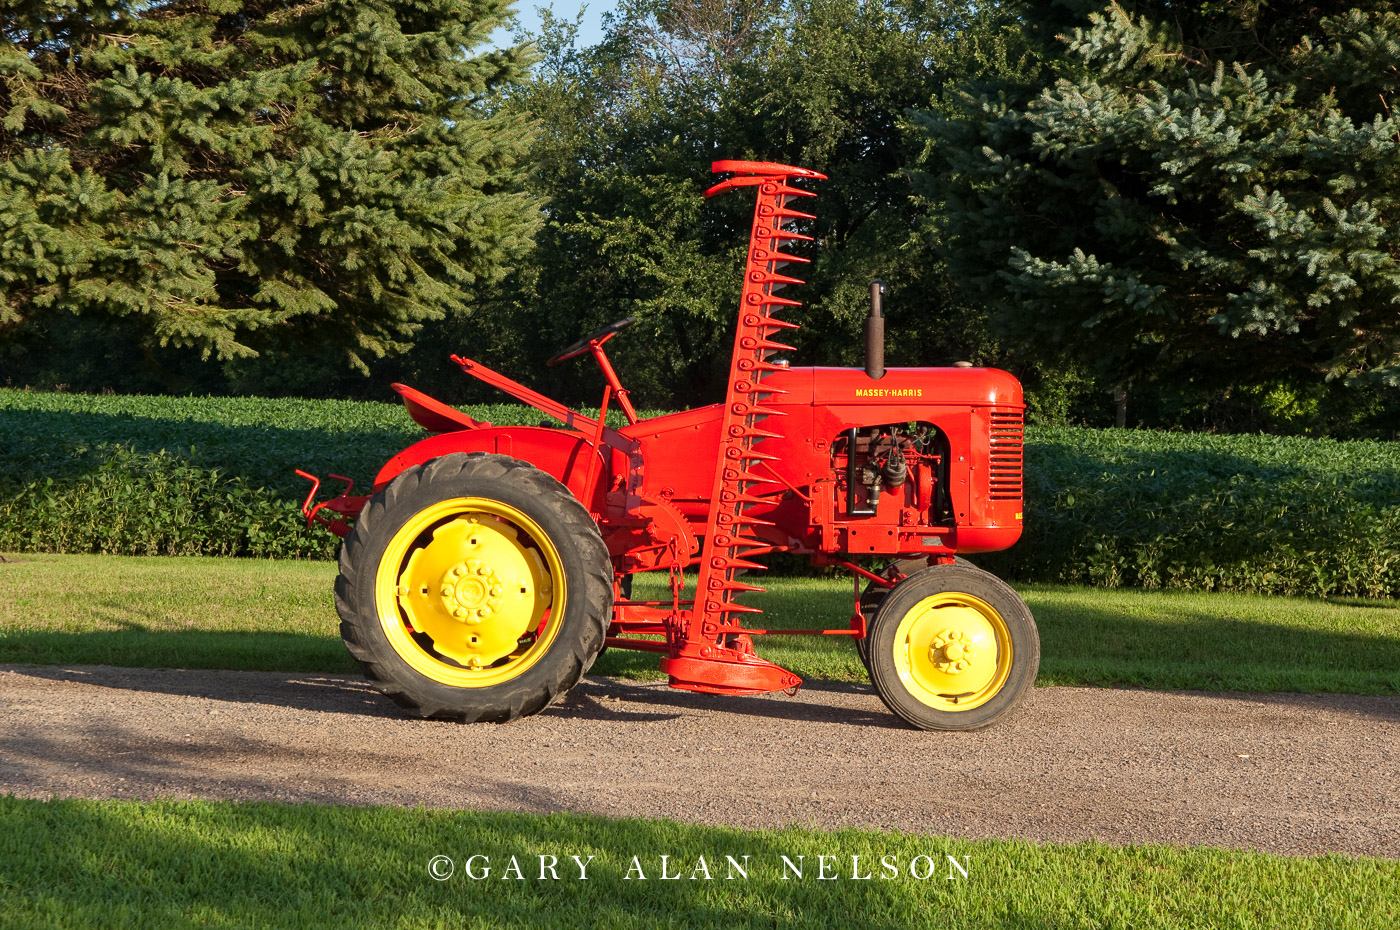 1949 Massey-Harris Pony with a side-mount sickle mower